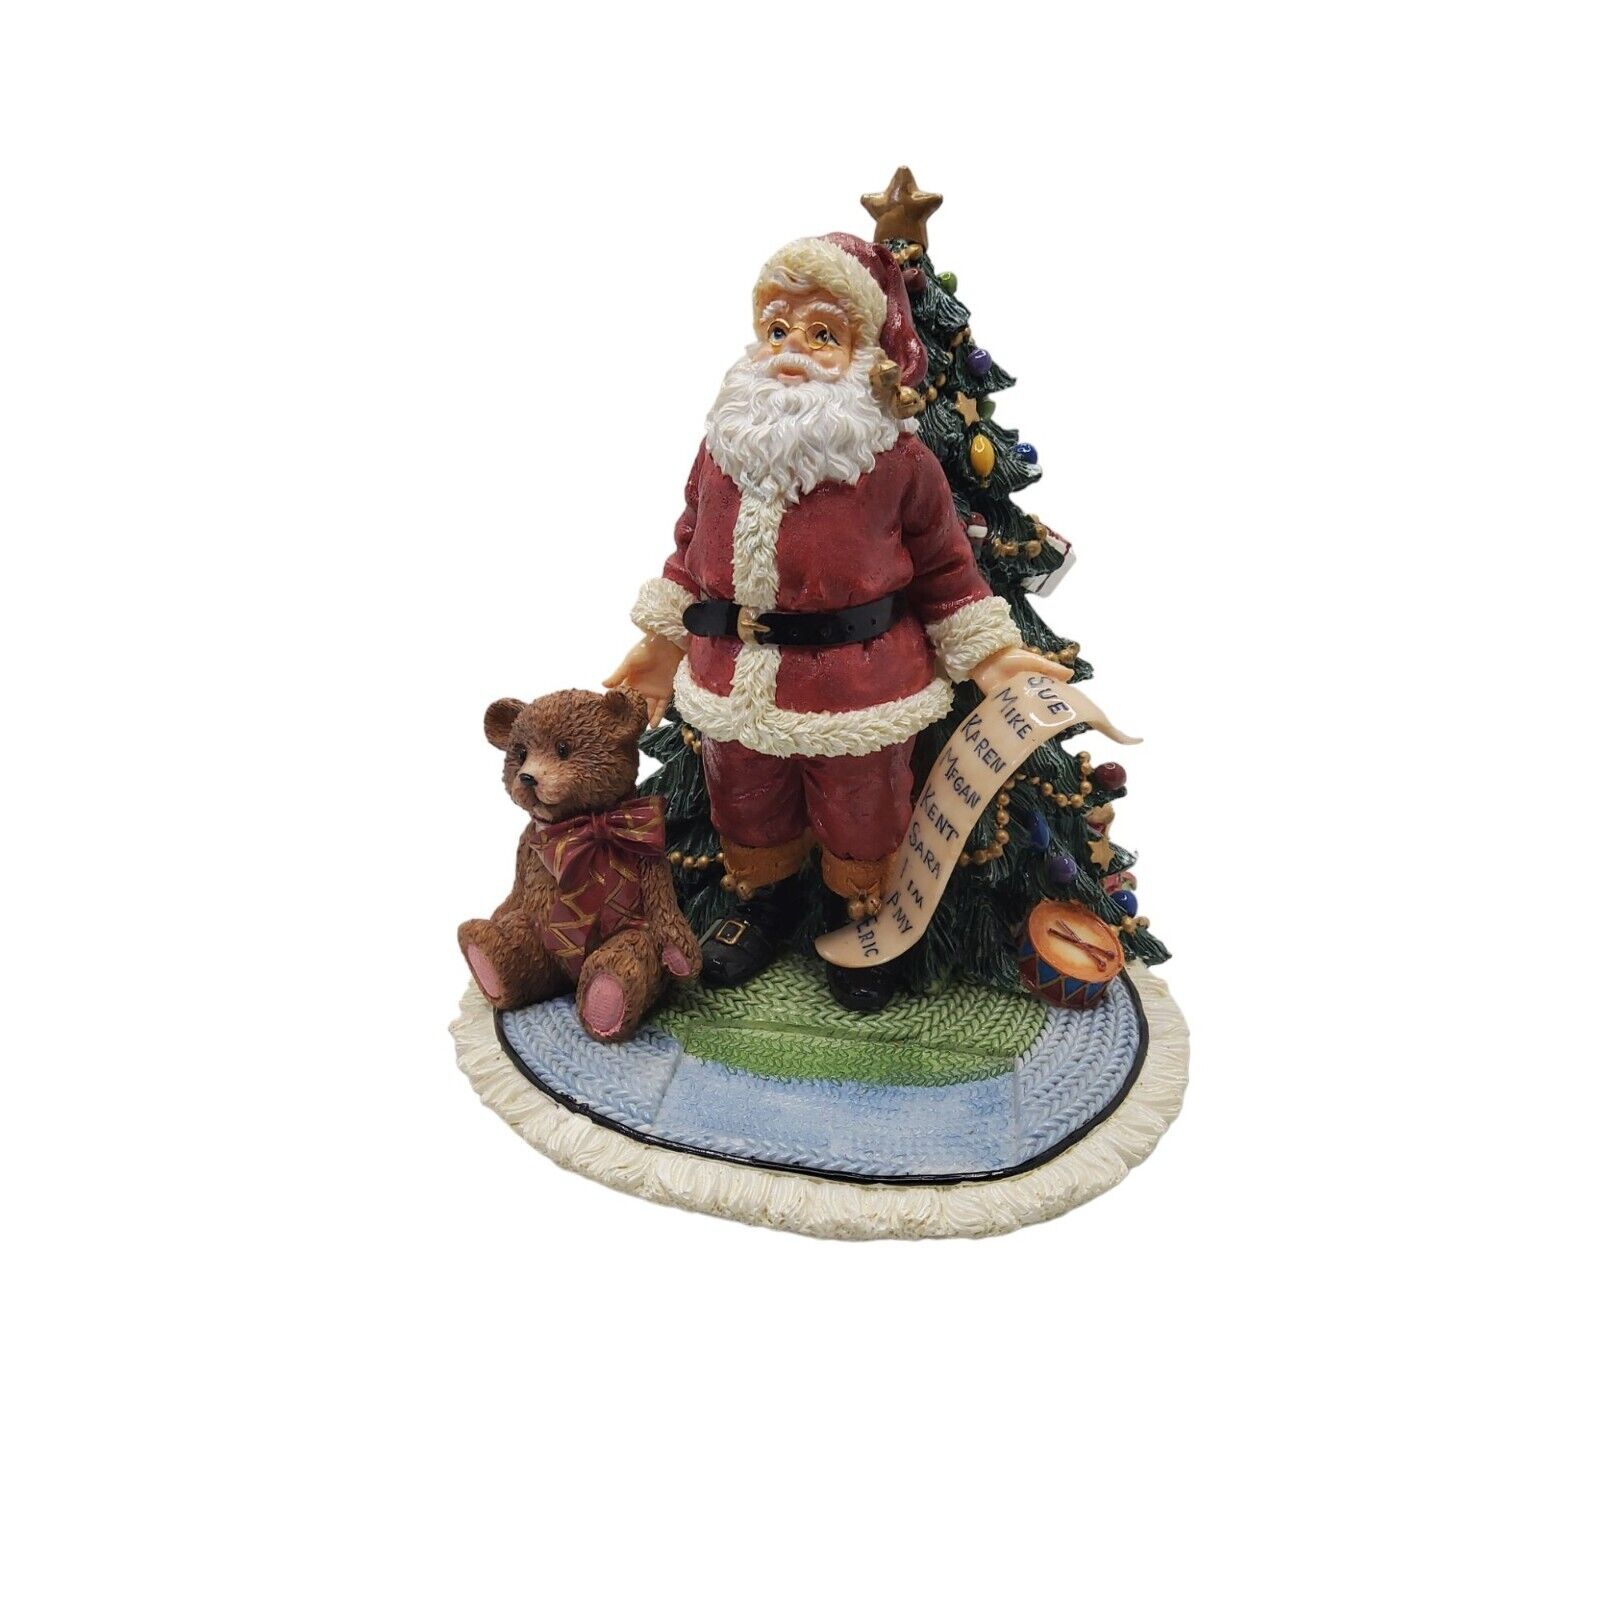 Fitz and Floyd “Here Comes Santa Claus” Music Box